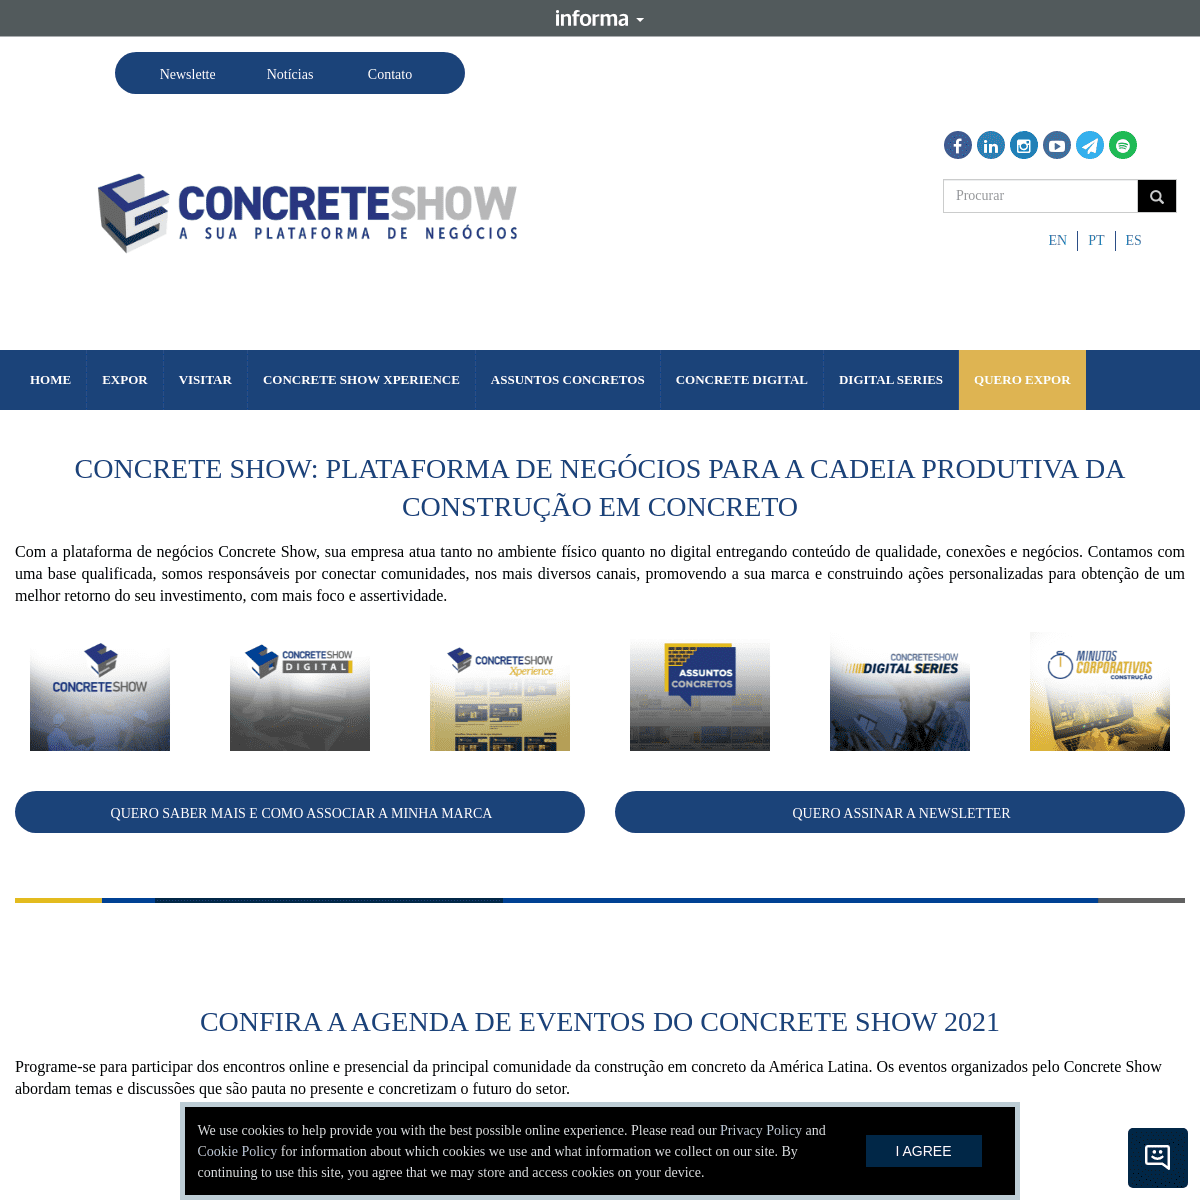 A complete backup of https://concreteshow.com.br